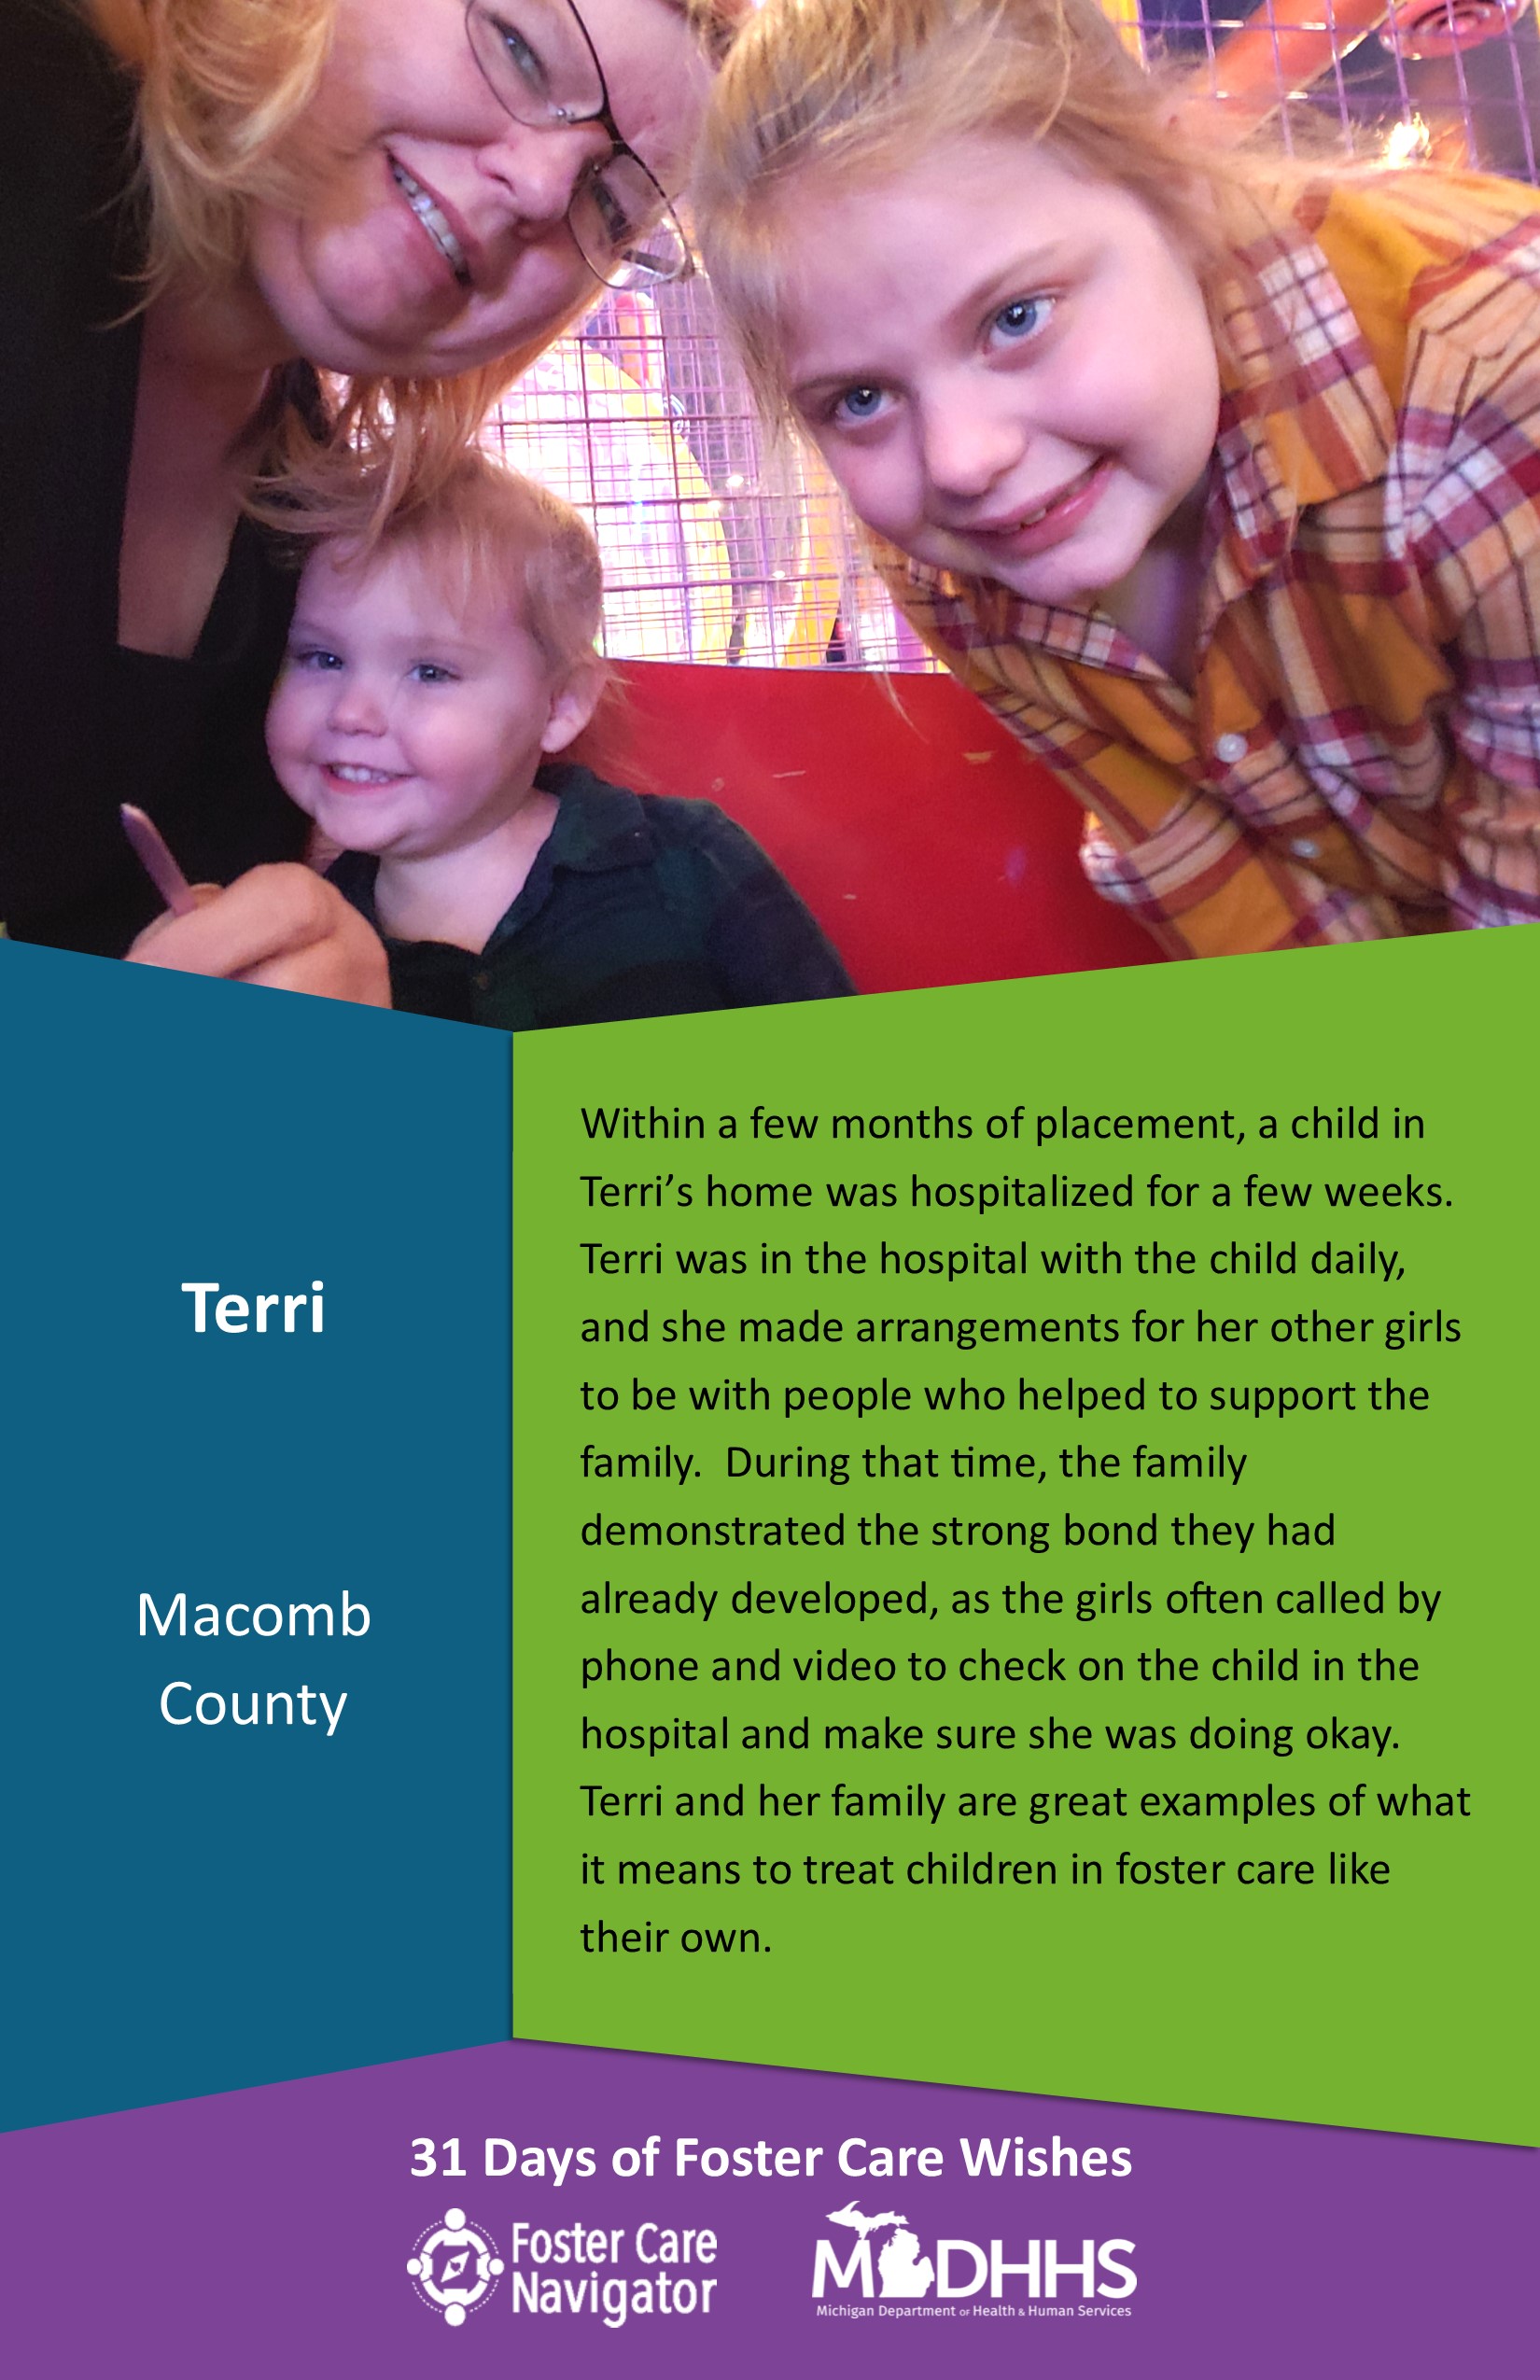 This full page feature includes all of the text listed in the body of this blog post as well as a photo of Terri. The background is blue on the left, green on the right, and purple at the bottom of the page where the logos are located.